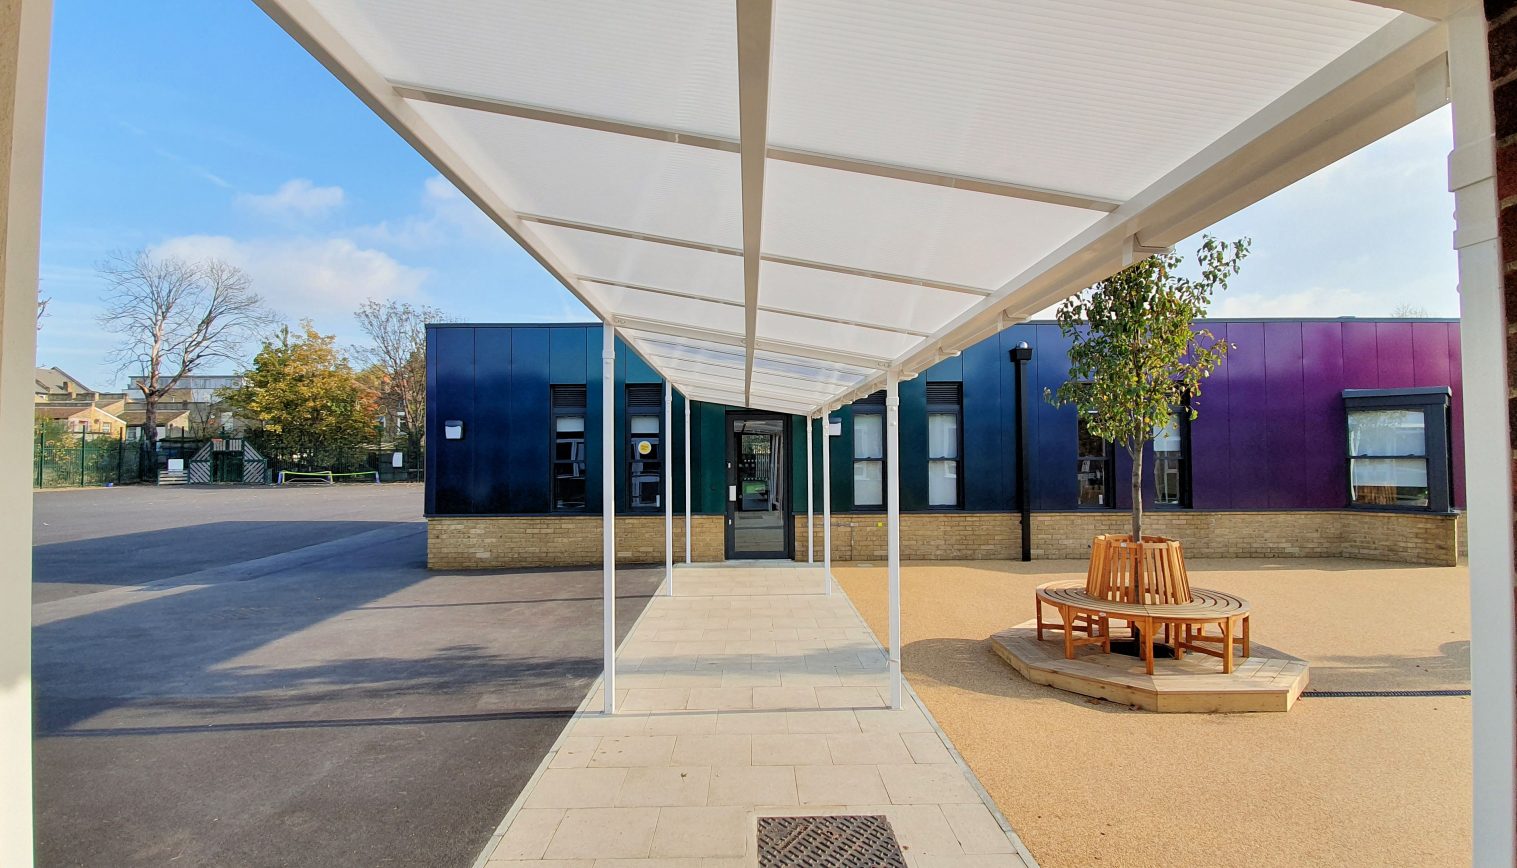 Three Ways School Canopies Will Help With Re-Opening In September